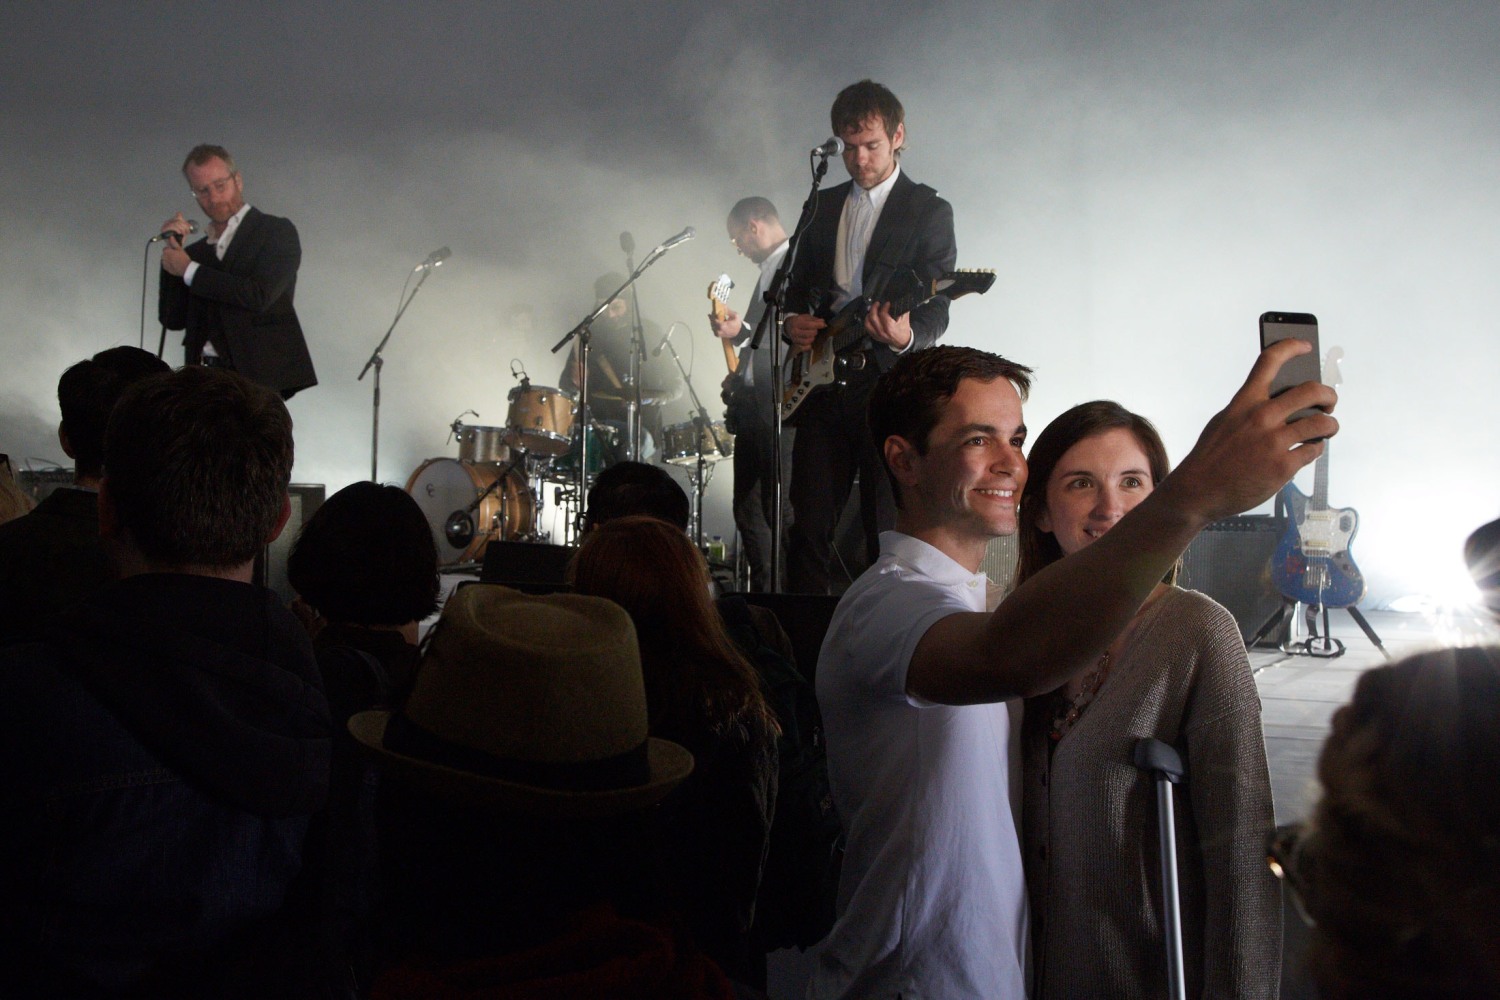 Ragnar Kjartansson and The National
A Lot of Sorrow, 2013-2014
Single-channel video
Duration: 6 hours, 9 minutes, 35 seconds
Originally performed&amp;nbsp;at MoMA PS1, as part of&amp;nbsp;Sunday Sessions
Photo: El&amp;iacute;sabet Davidsdottir